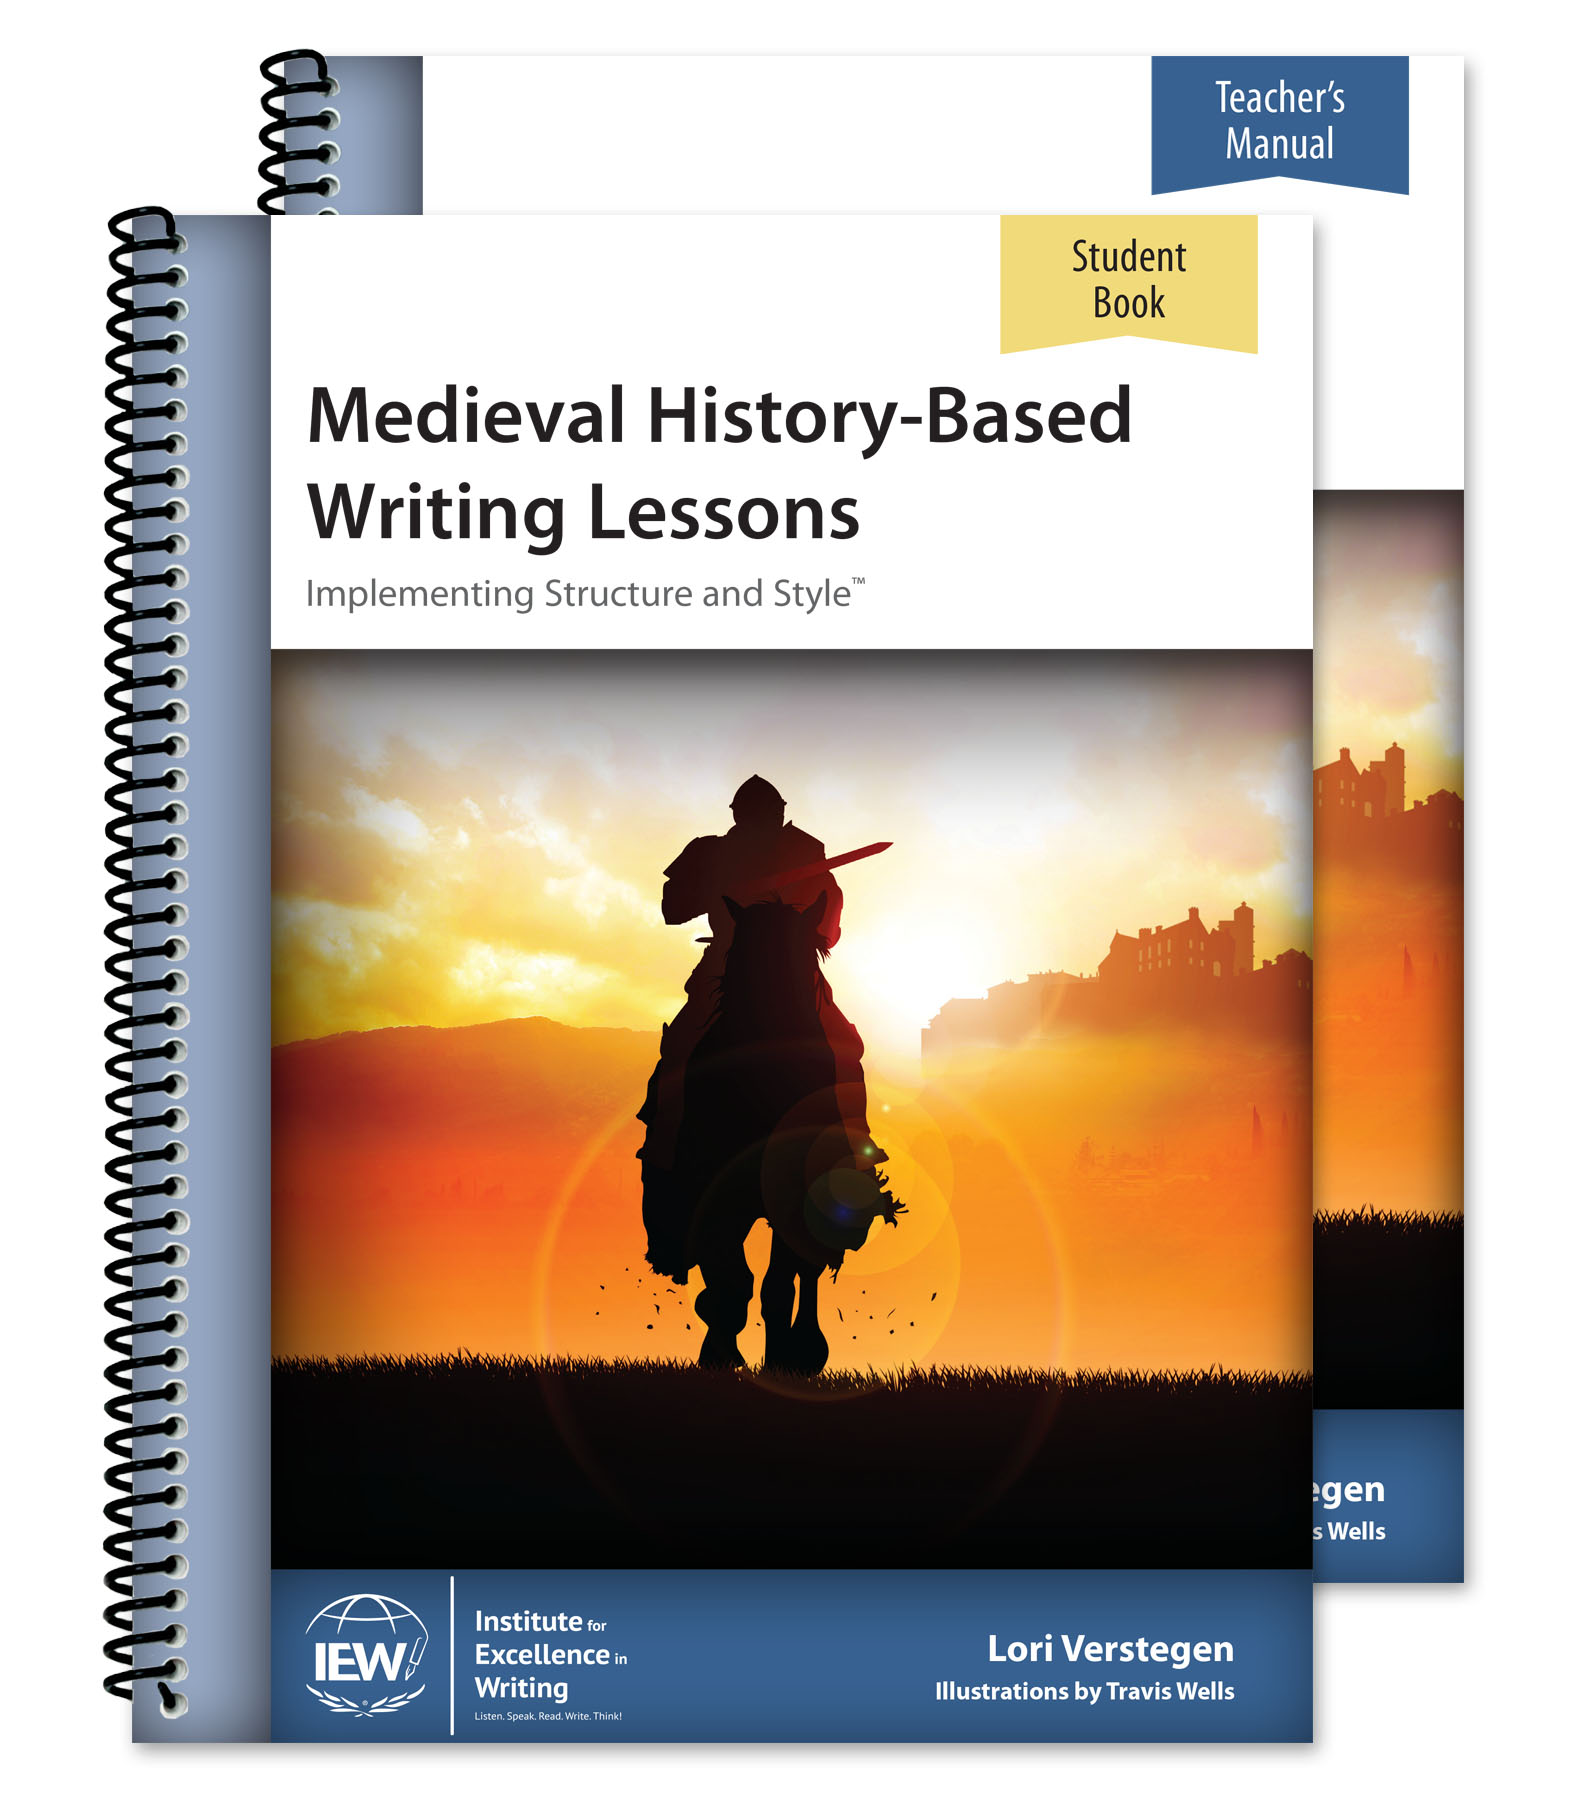 Medieval History-Based Writing Lessons [Teacher/Student Combo]